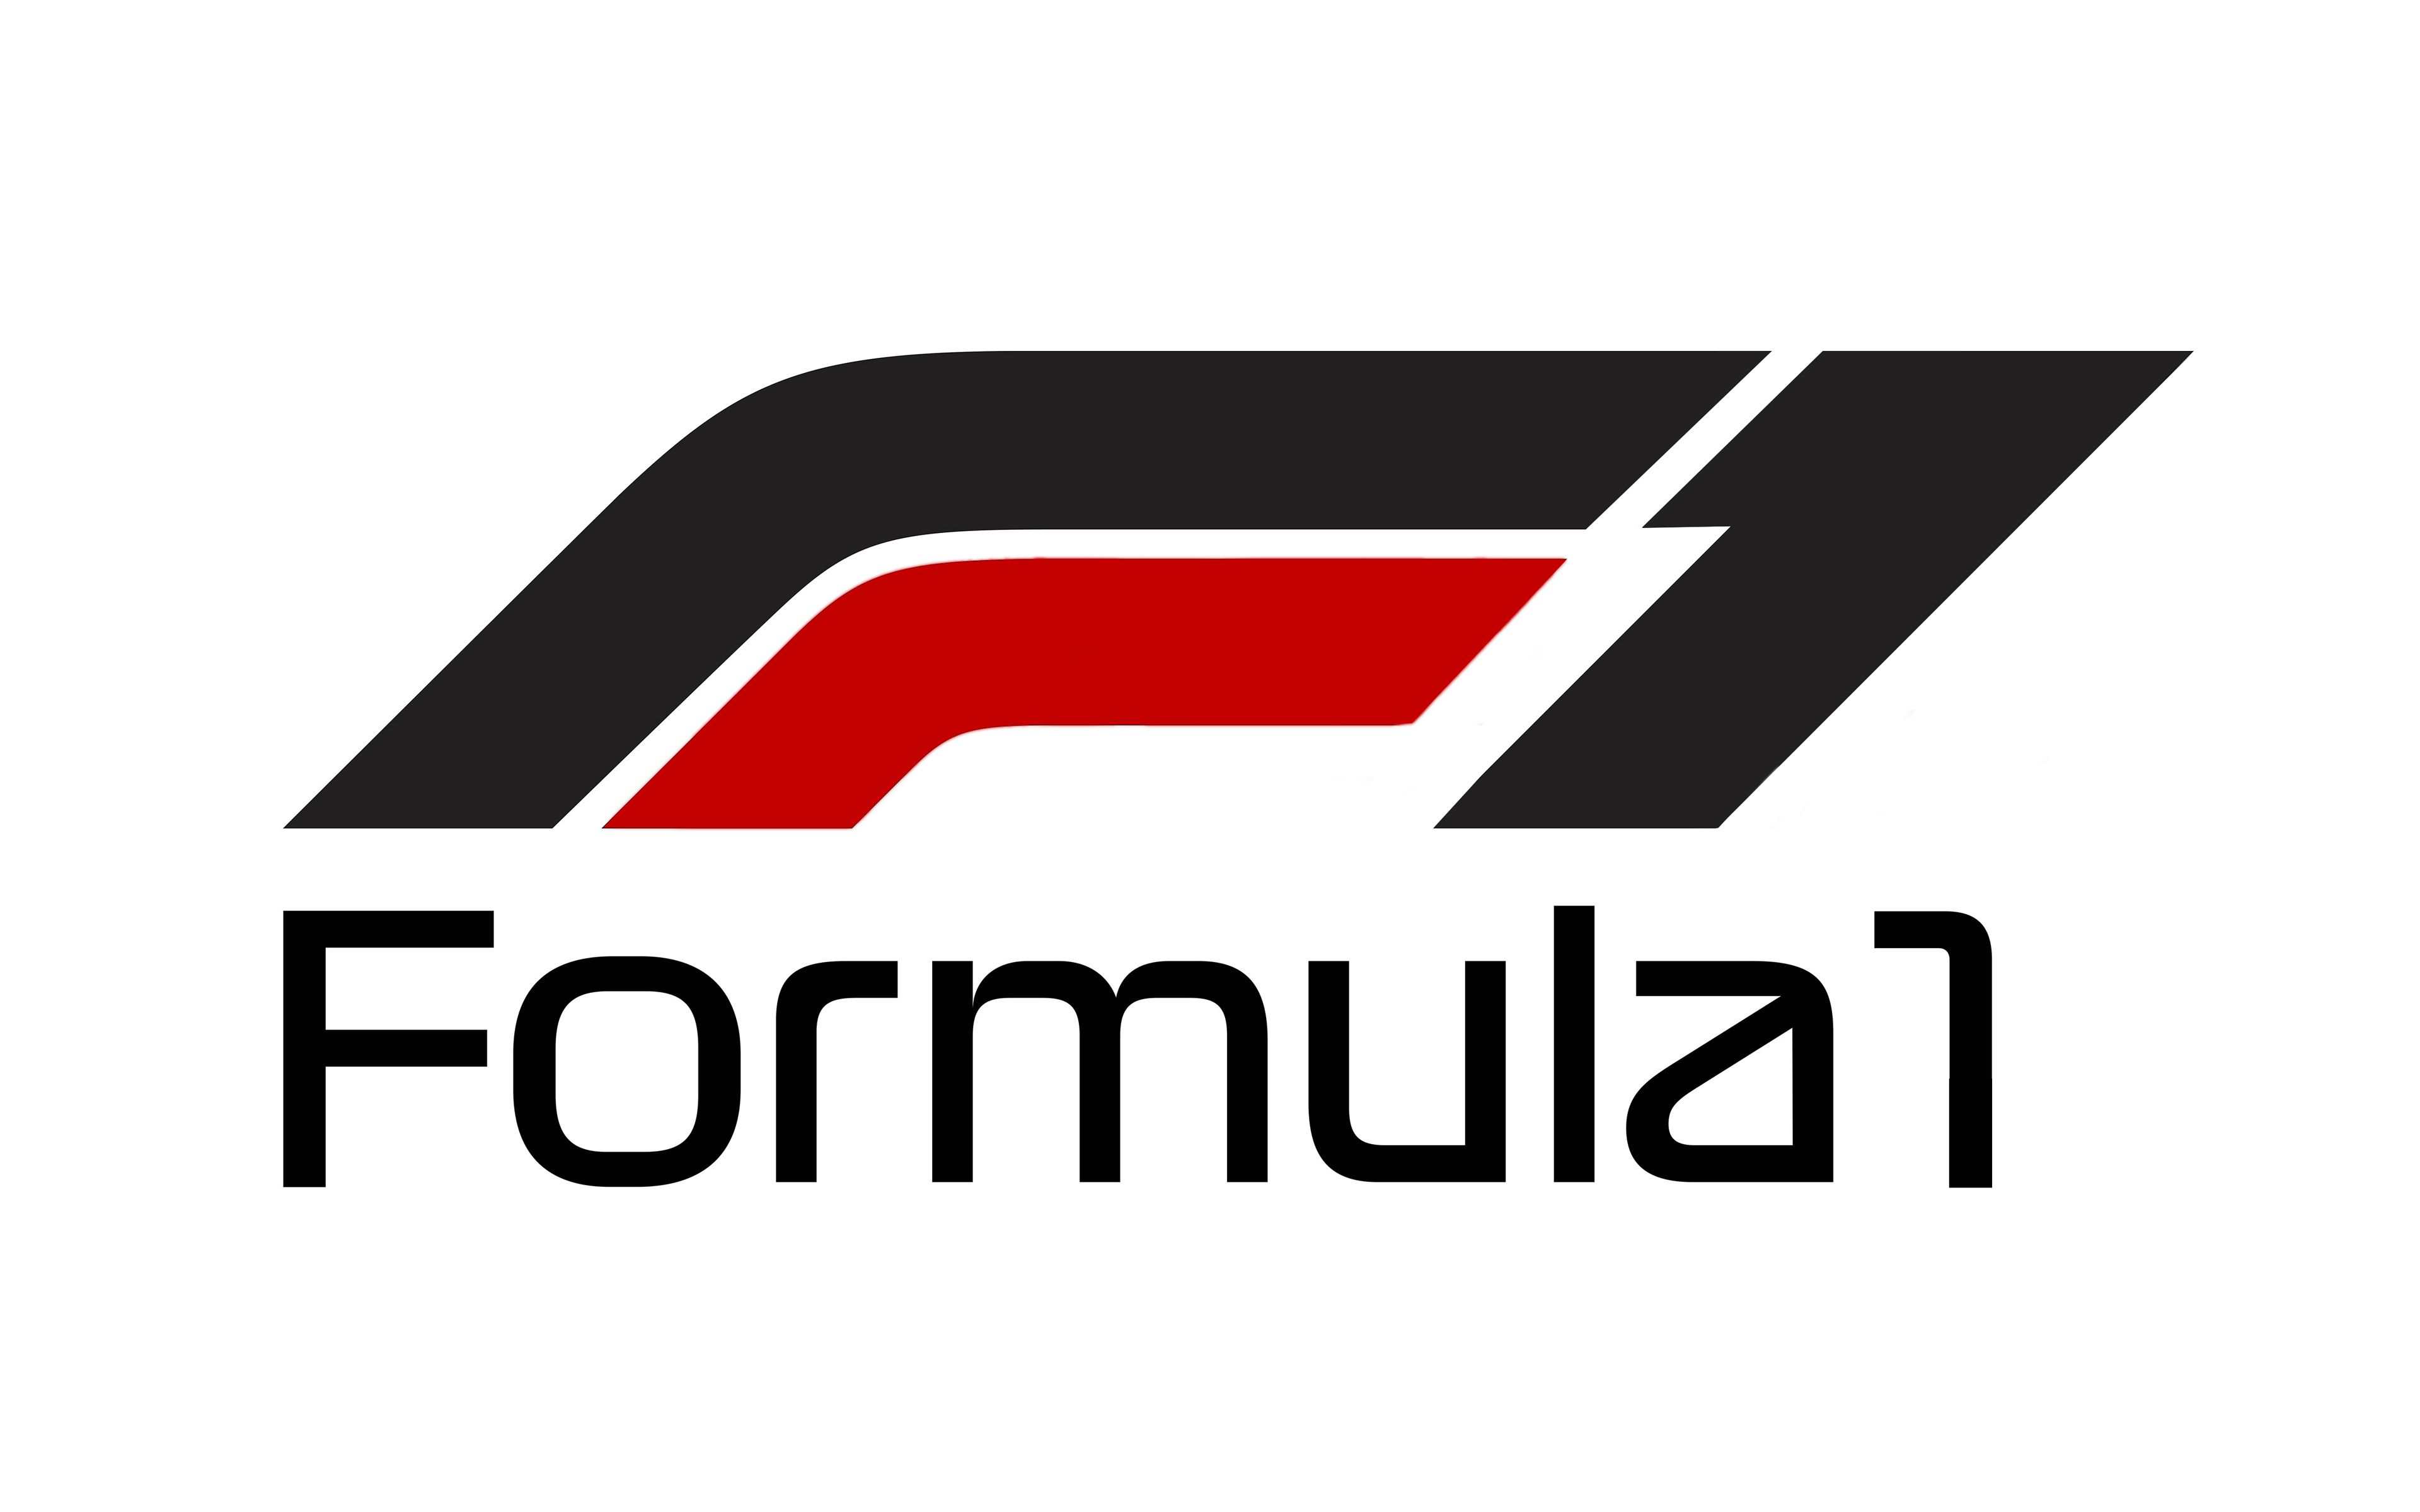 Download wallpaper 4k, Formula new logo, F FIA, white backgroud, Formula 1 new logo for desktop with resolution 3840x2400. High Quality HD picture wallpaper